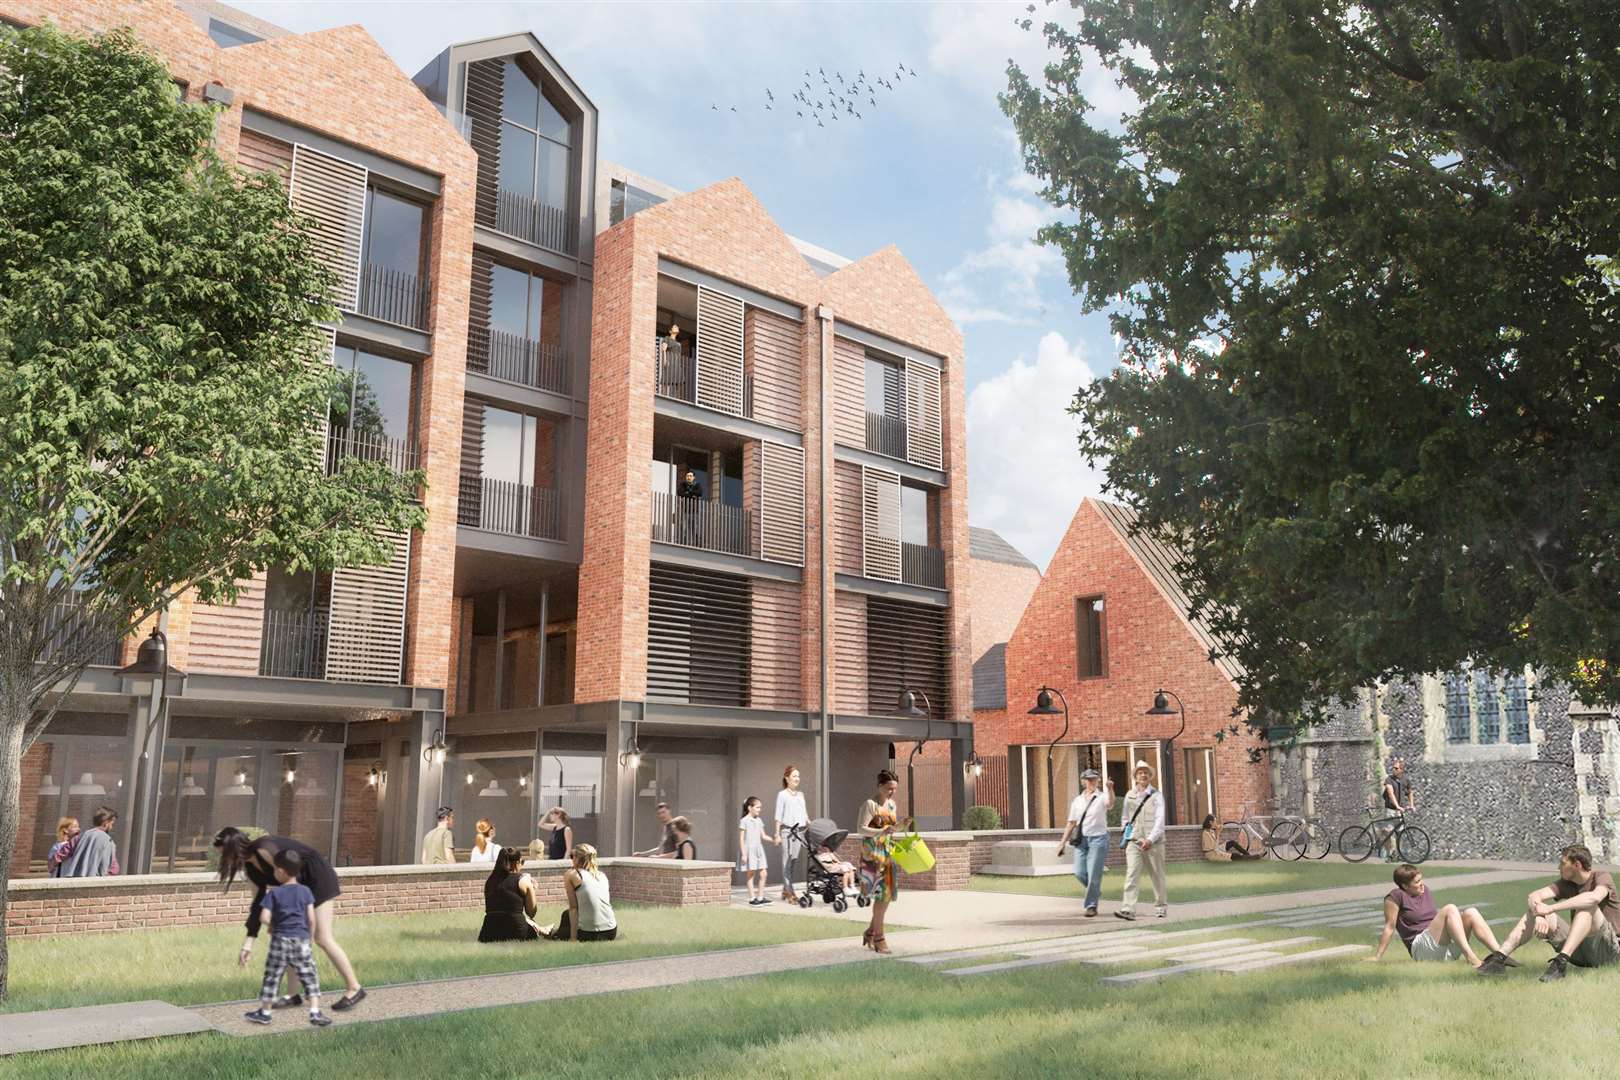 How the former Nasons site in Canterbury will look